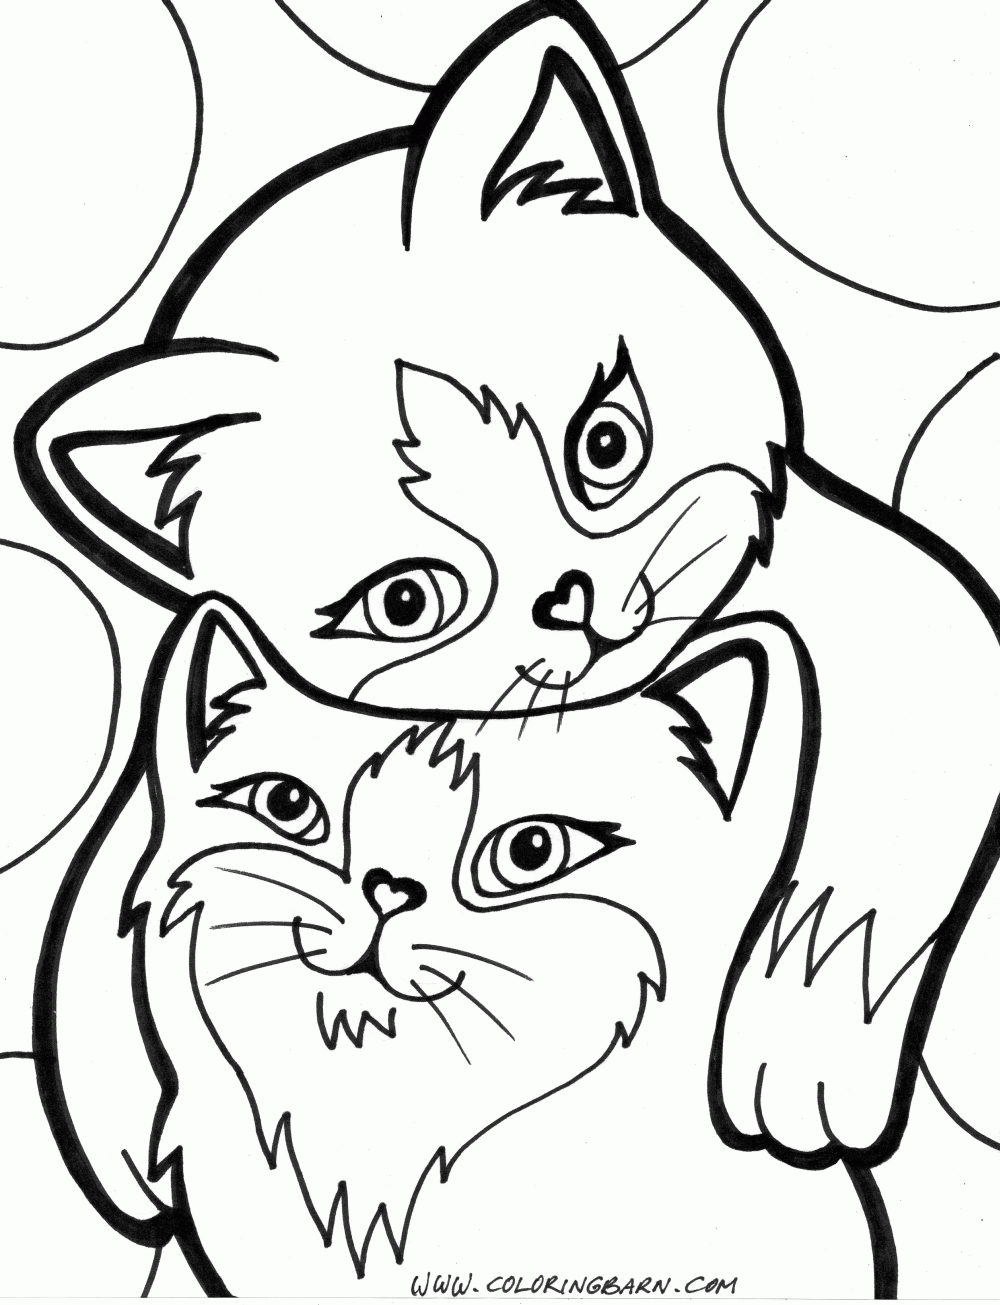 Cartoon Cat Coloring Pages Cute Kitten Cat Coloring Pages. Kids ...